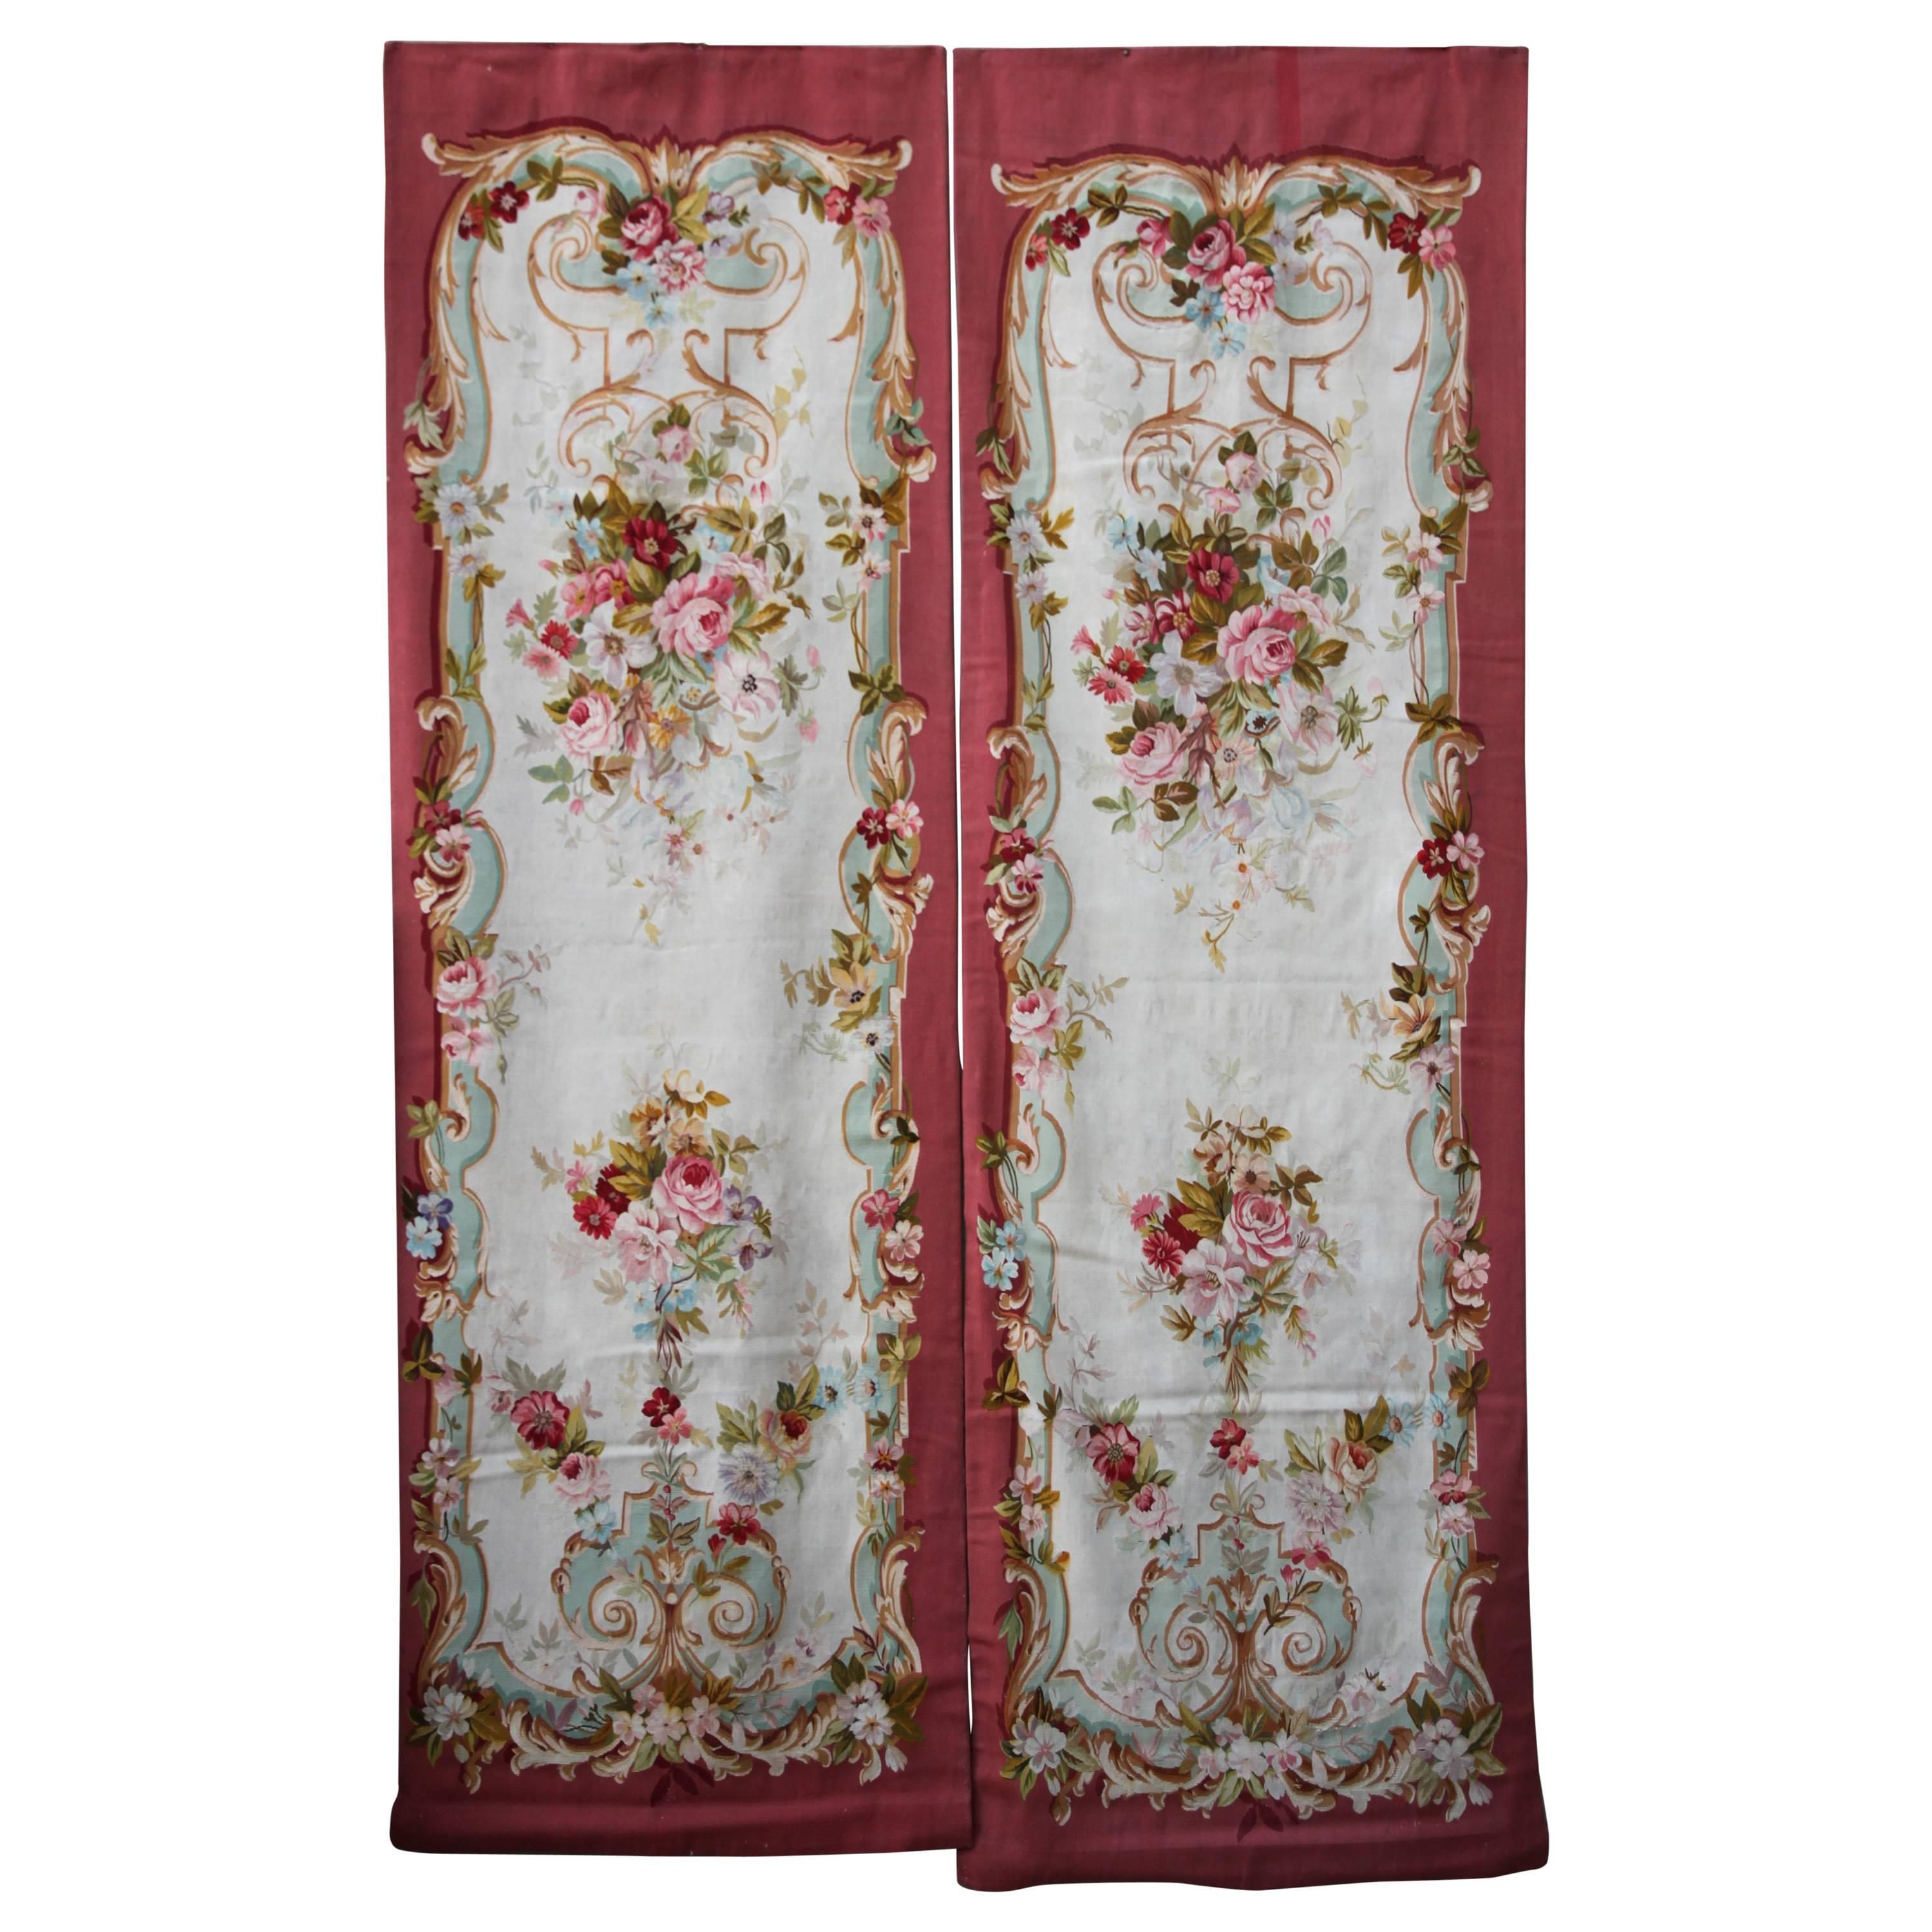 Pair of 19th Century Floral Aubusson Panels